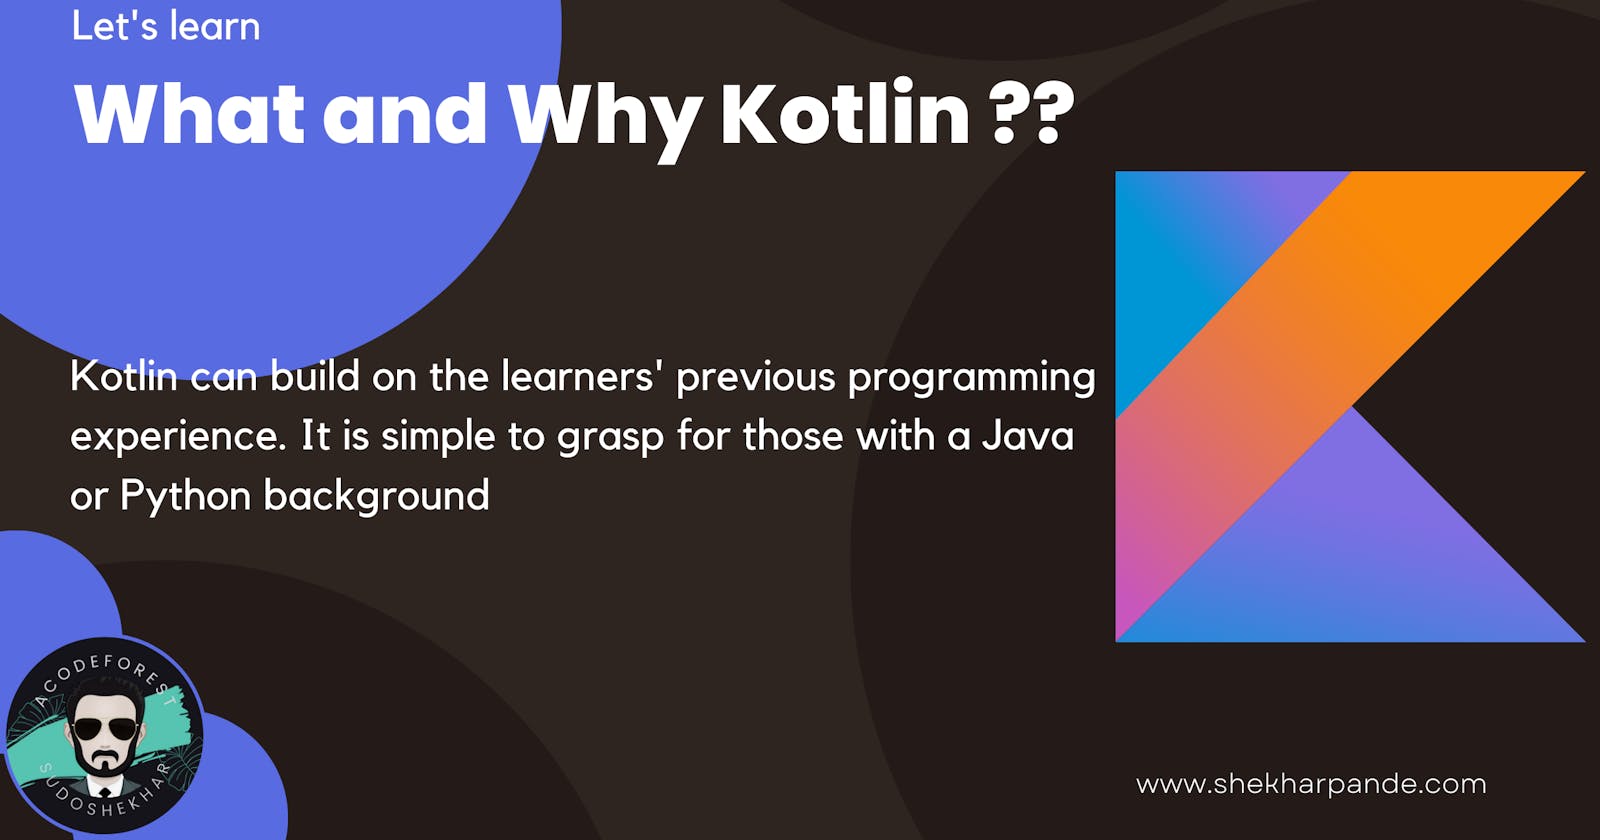 What and Why Kotlin ??